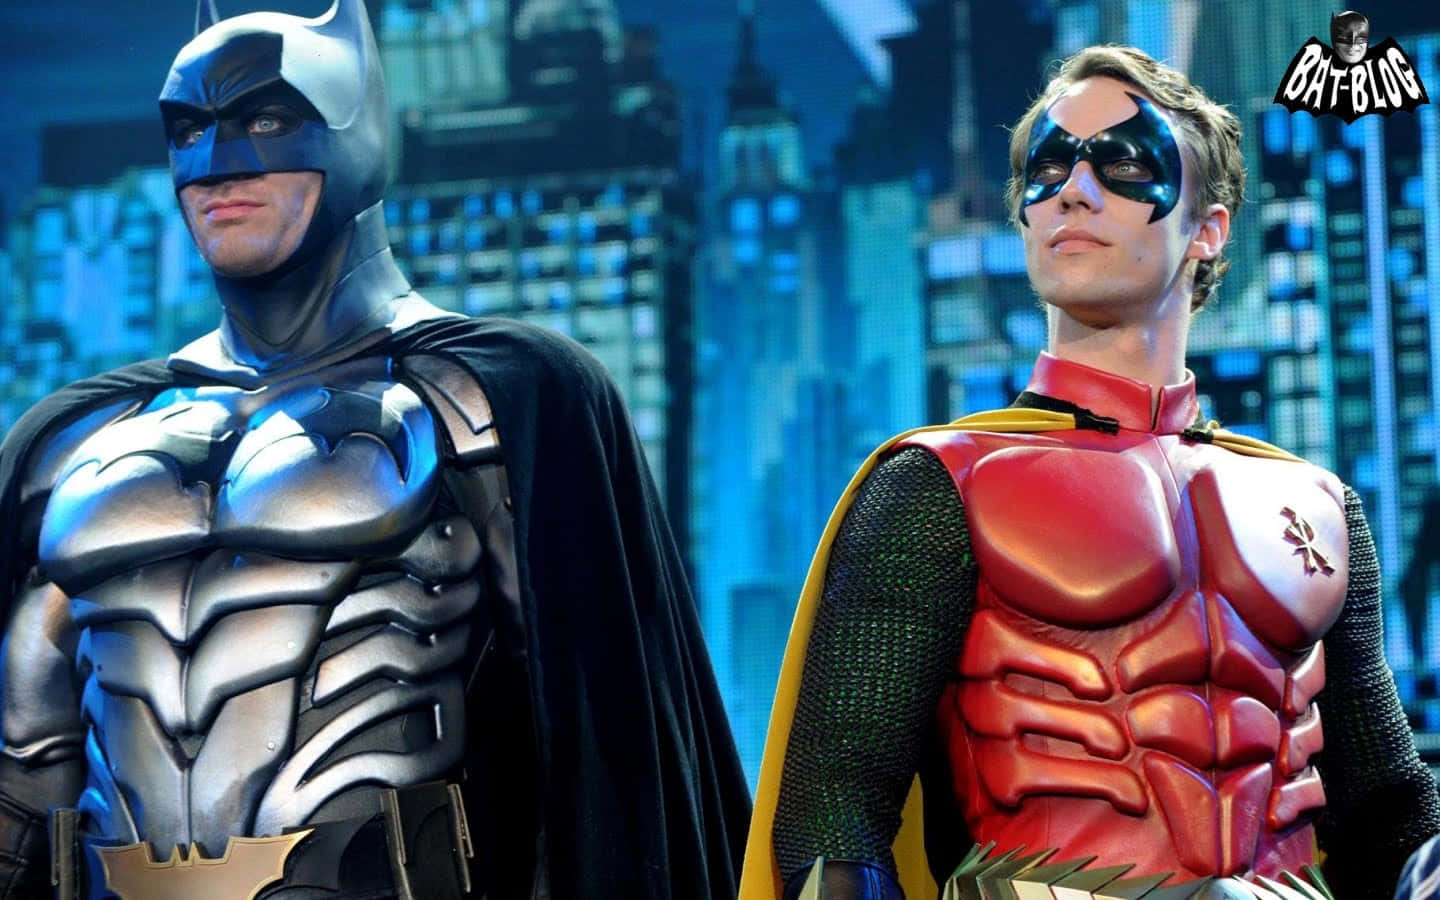 Two Batman And Robin Costumes Standing Next To Each Other Wallpaper